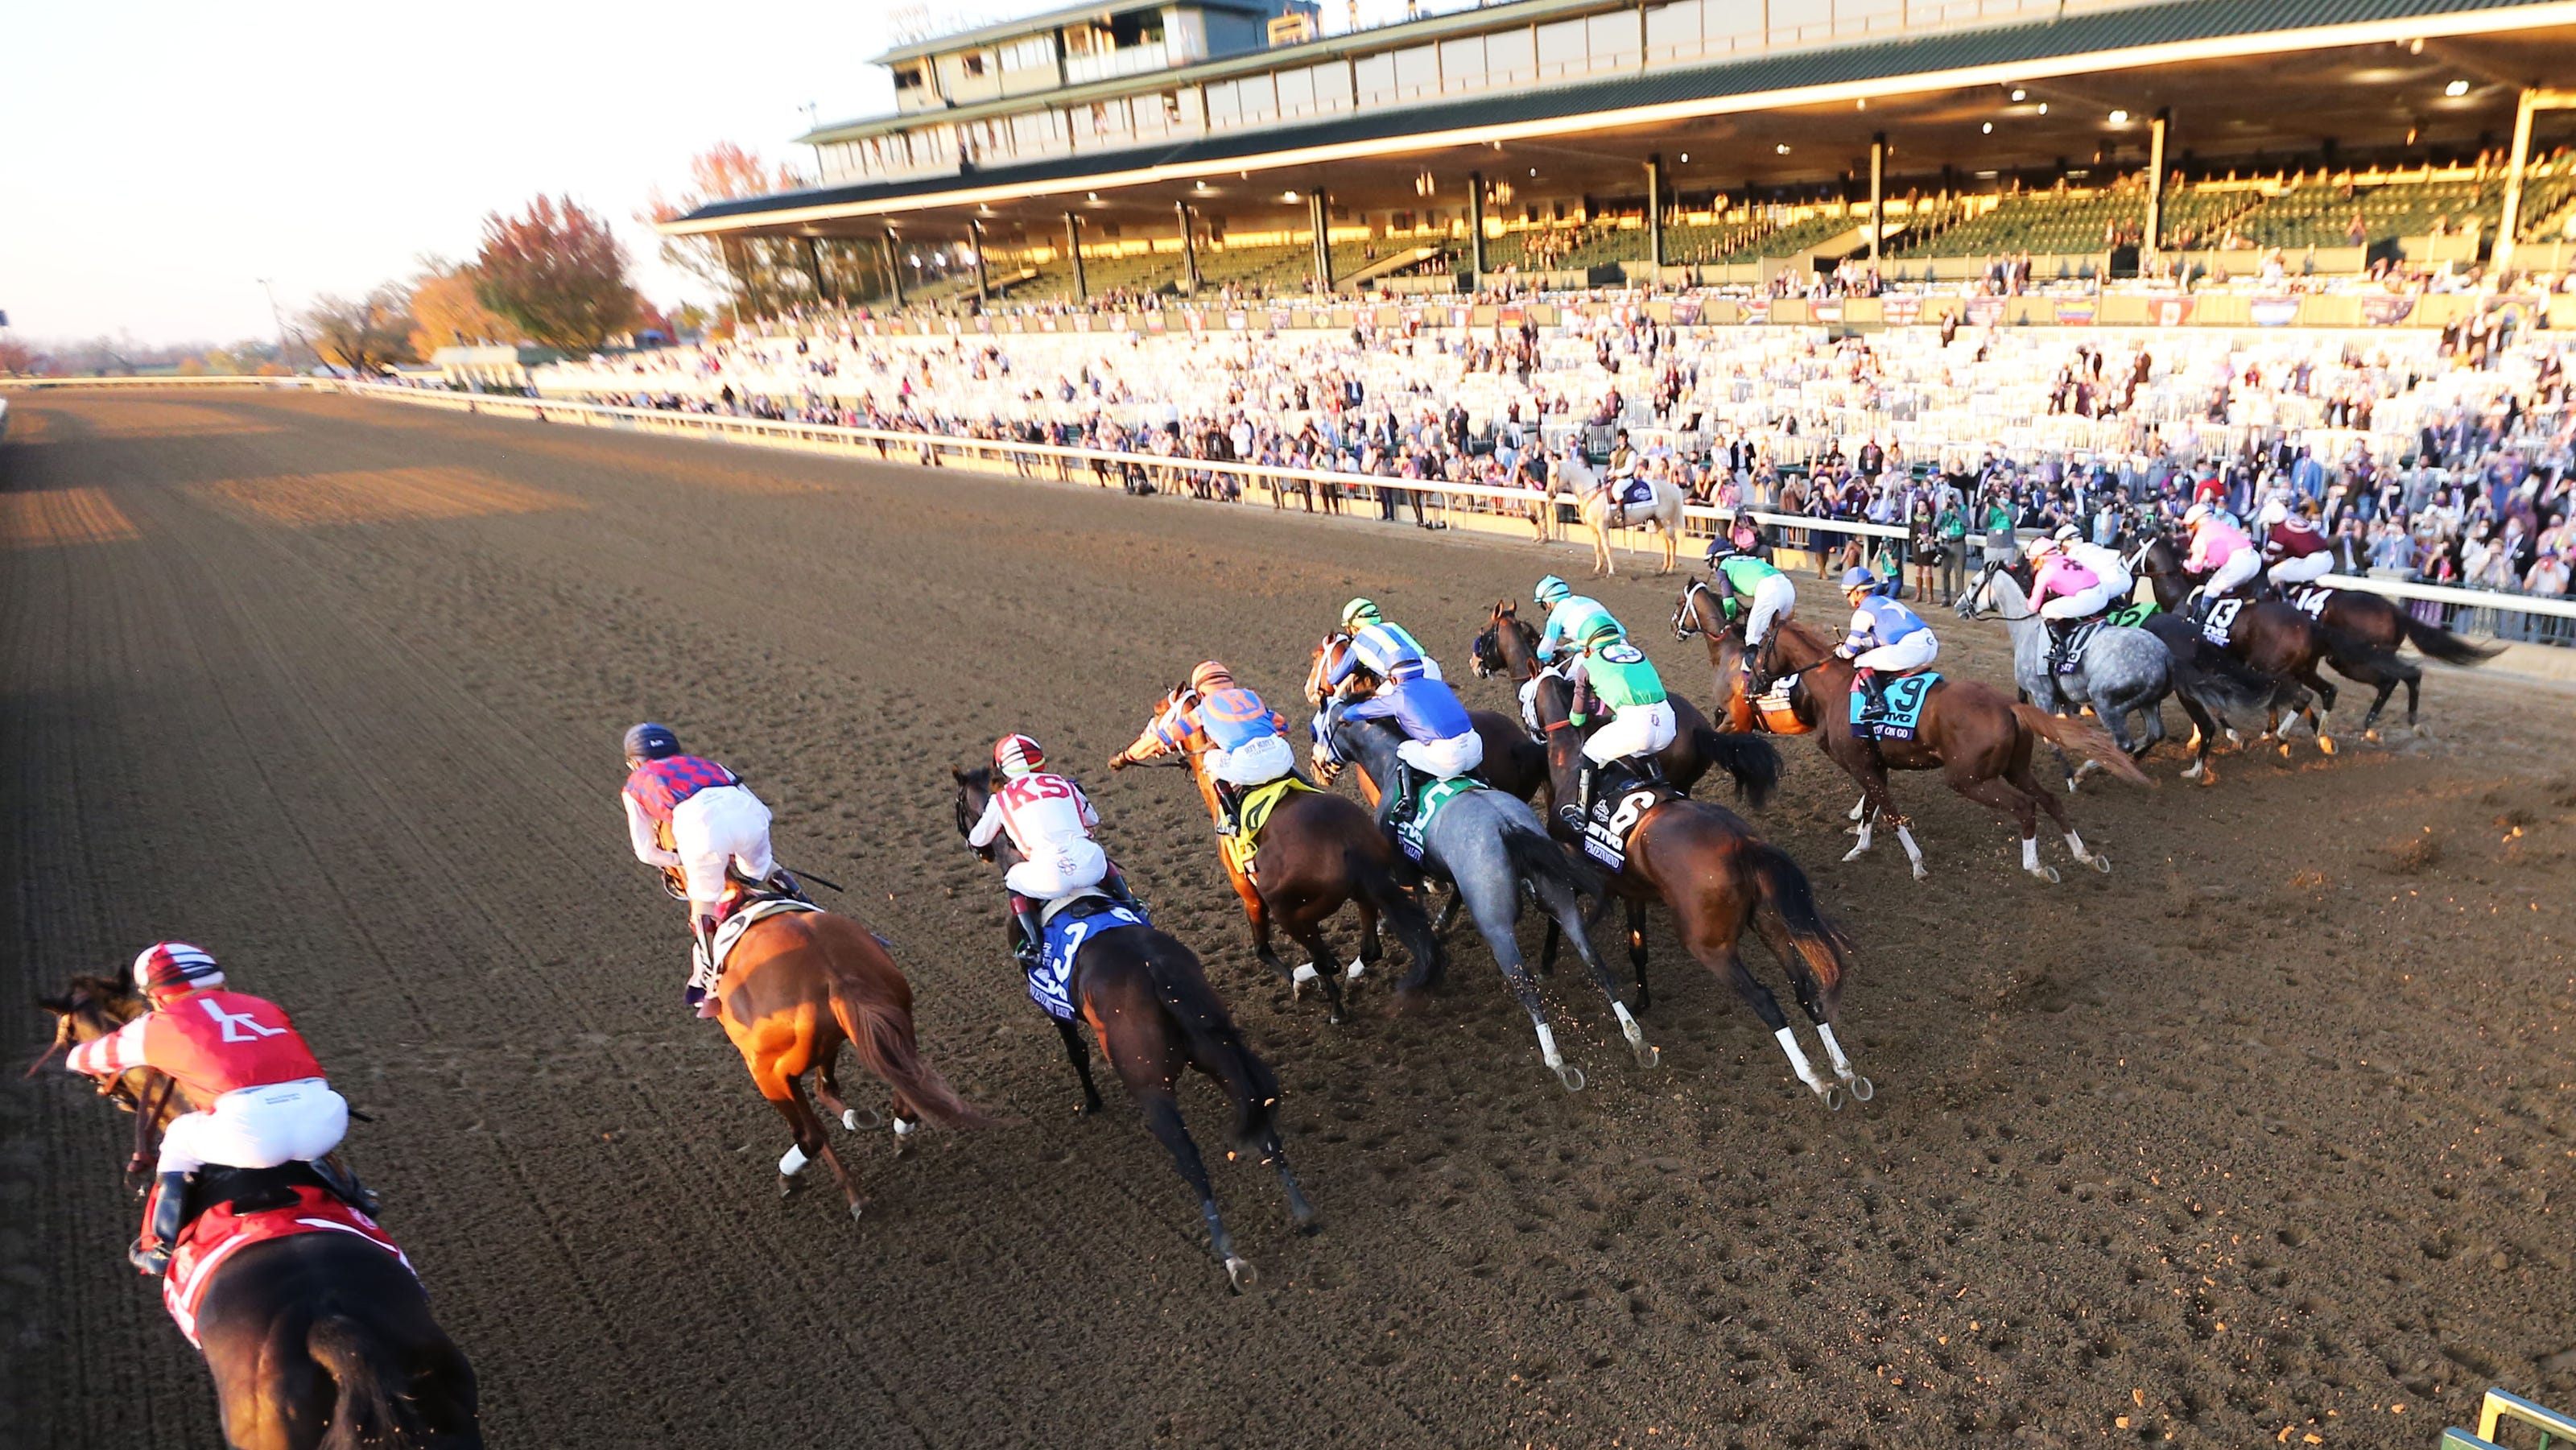 Keeneland Spring Meet 2022 Tickets, schedule and how to watch